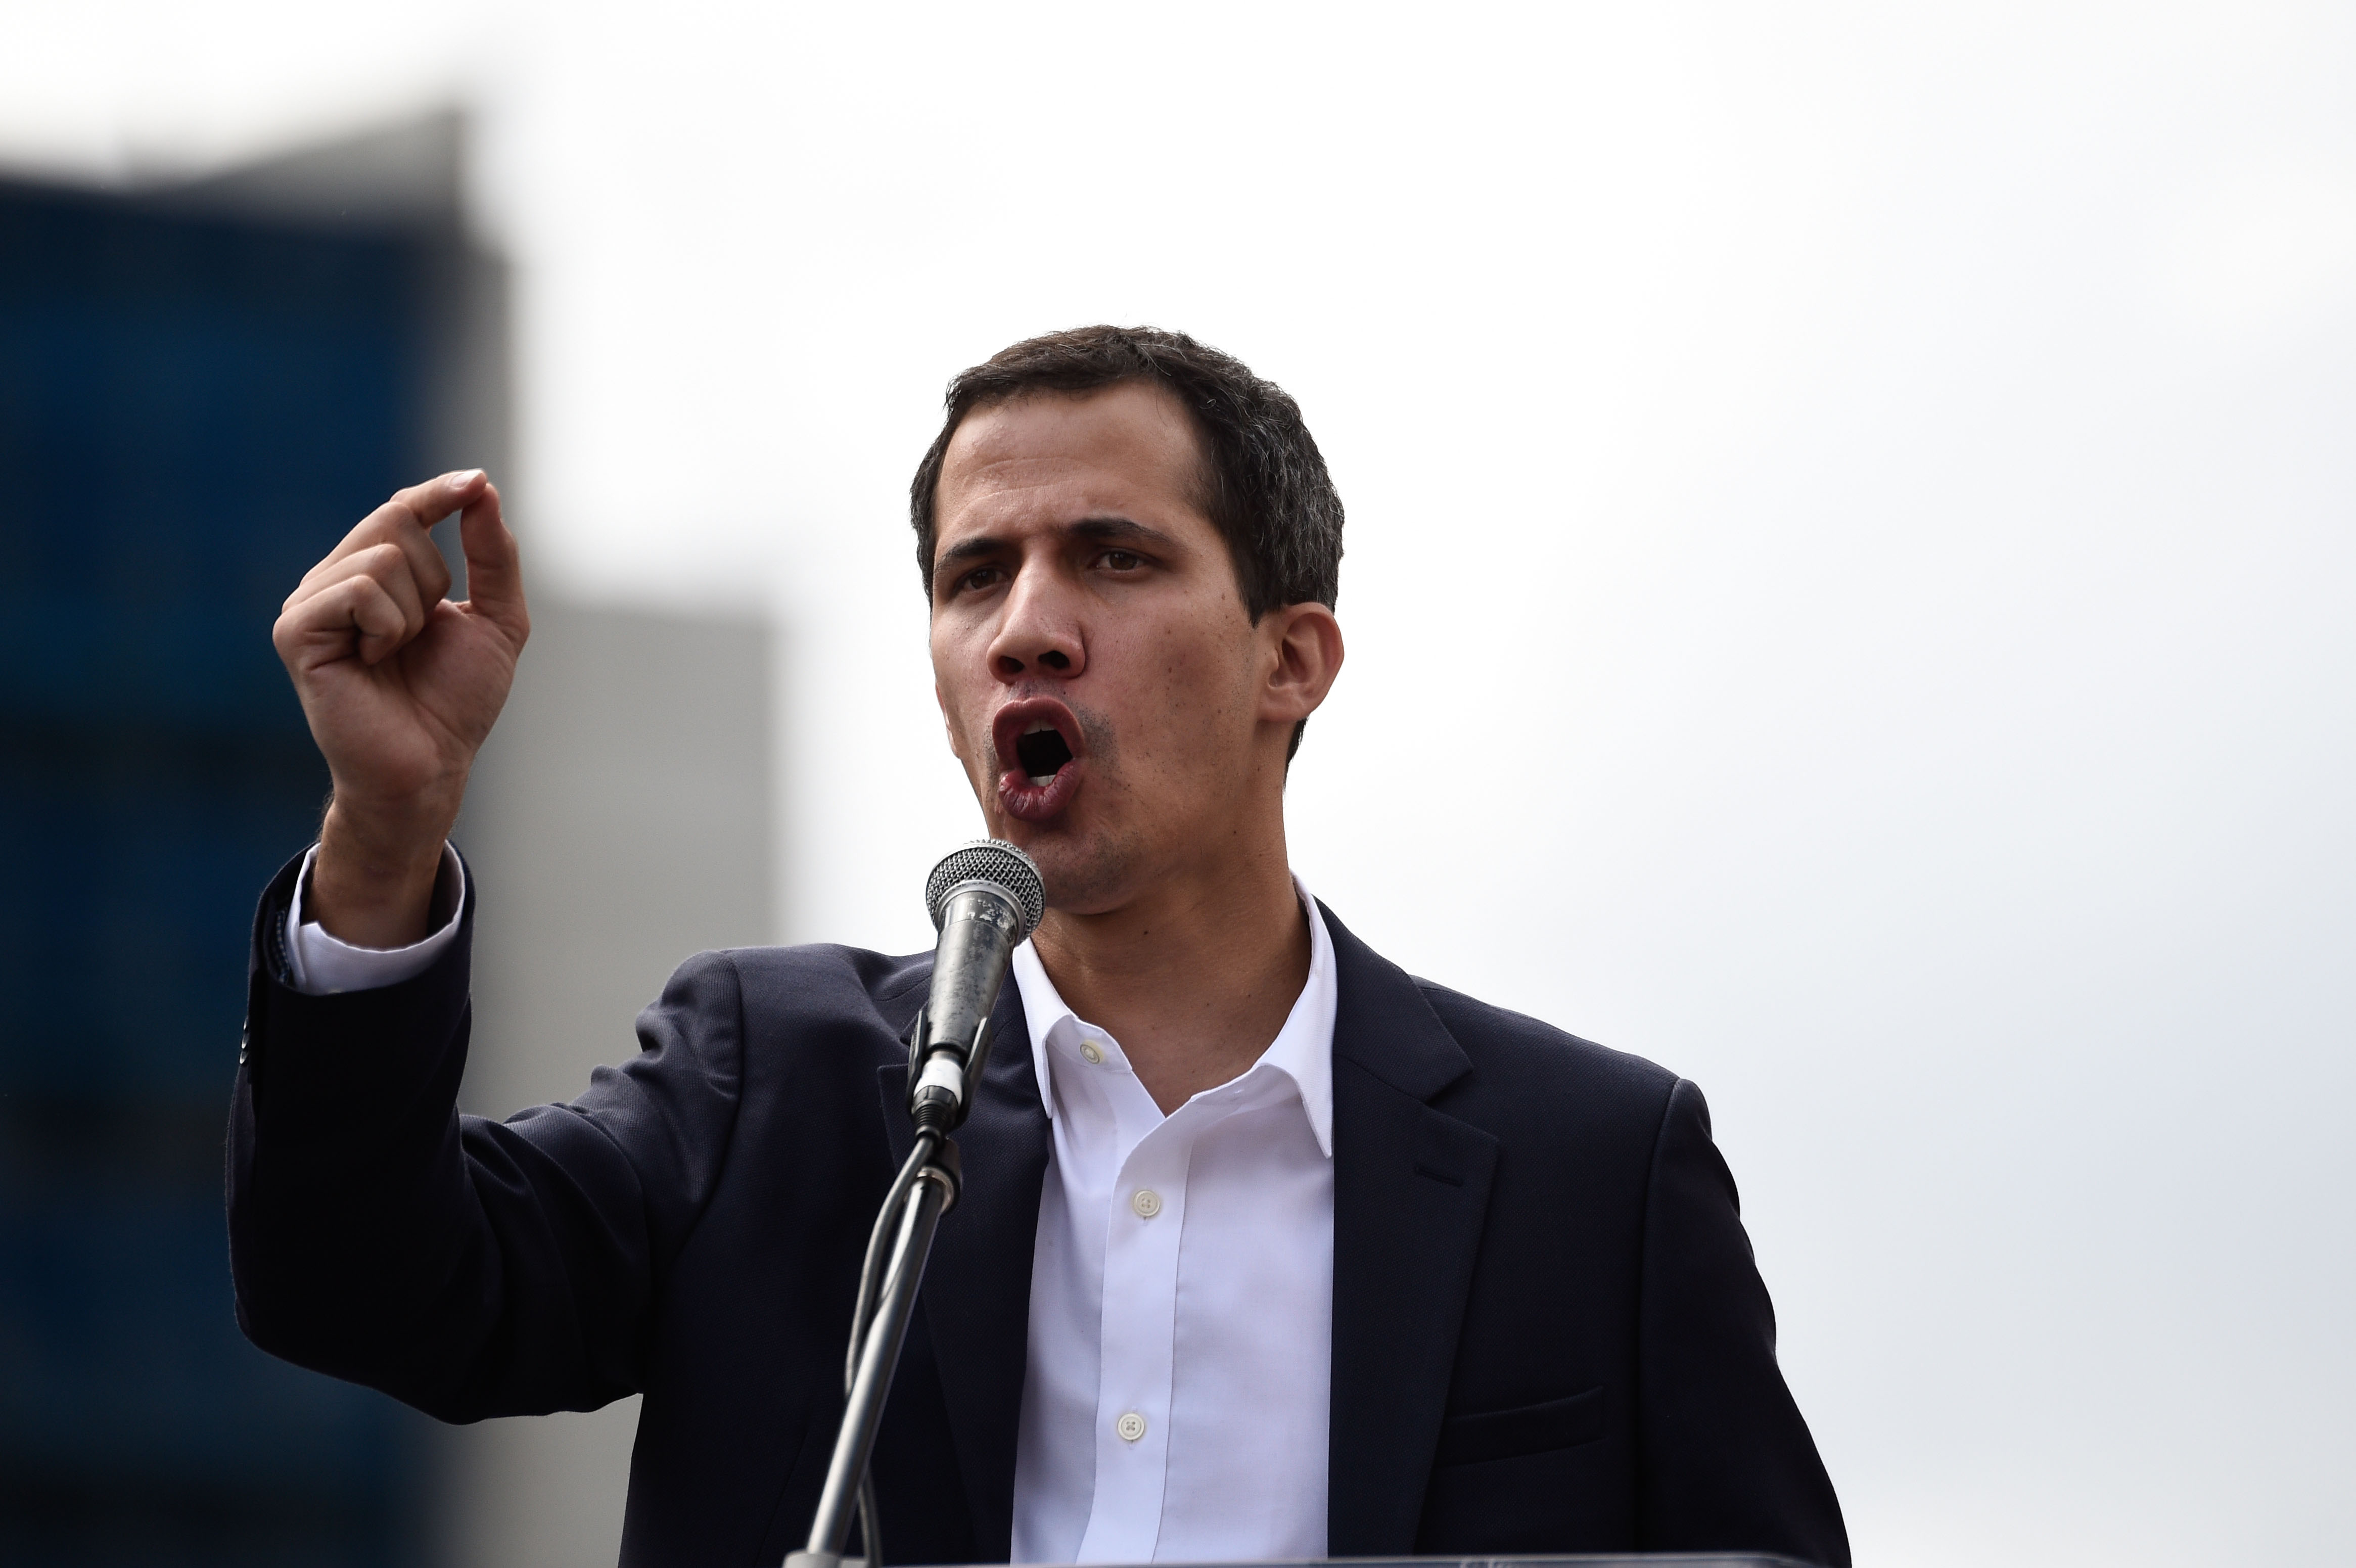 Venezuela's National Assembly head Juan Guaido speaks to the crowd during a mass opposition rally against leader Nicolas Maduro in which he declared himself the country's "acting president", on the anniversary of a 1958 uprising that overthrew military dictatorship, in Caracas on January 23, 2019. - "I swear to formally assume the national executive powers as acting president of Venezuela to end the usurpation, (install) a transitional government and hold free elections," said Guaido as thousands of supporters cheered. Moments earlier, the loyalist-dominated Supreme Court ordered a criminal investigation of the opposition-controlled legislature. (Photo by Federico PARRA / AFP) (Photo credit should read FEDERICO PARRA/AFP/Getty Images)